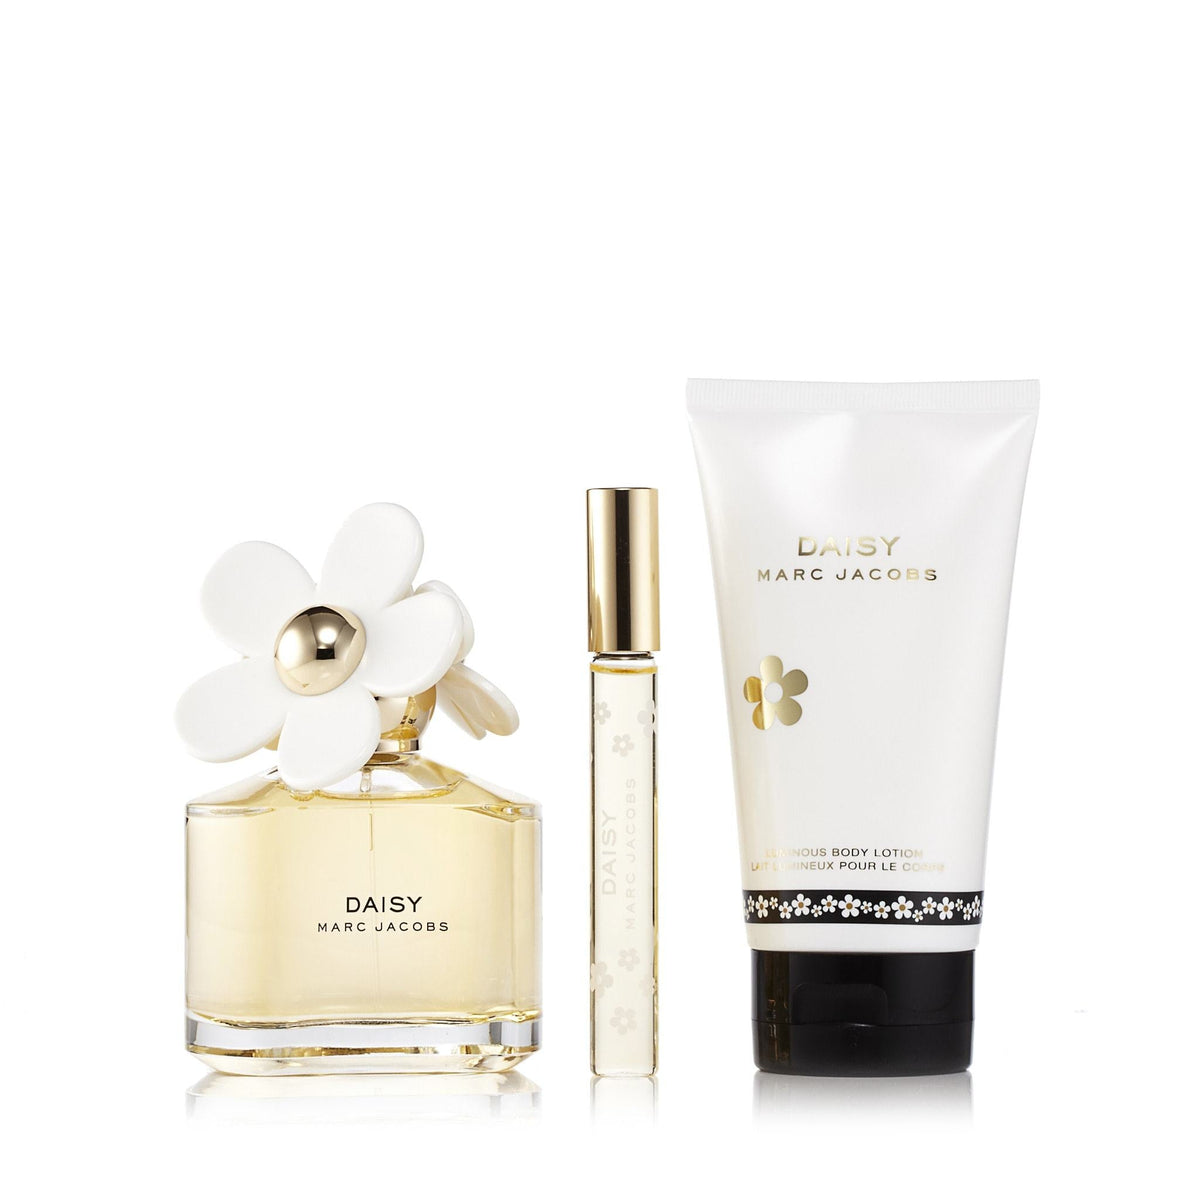 Daisy Gift Set for Women by Marc Jacobs 3.4 oz.